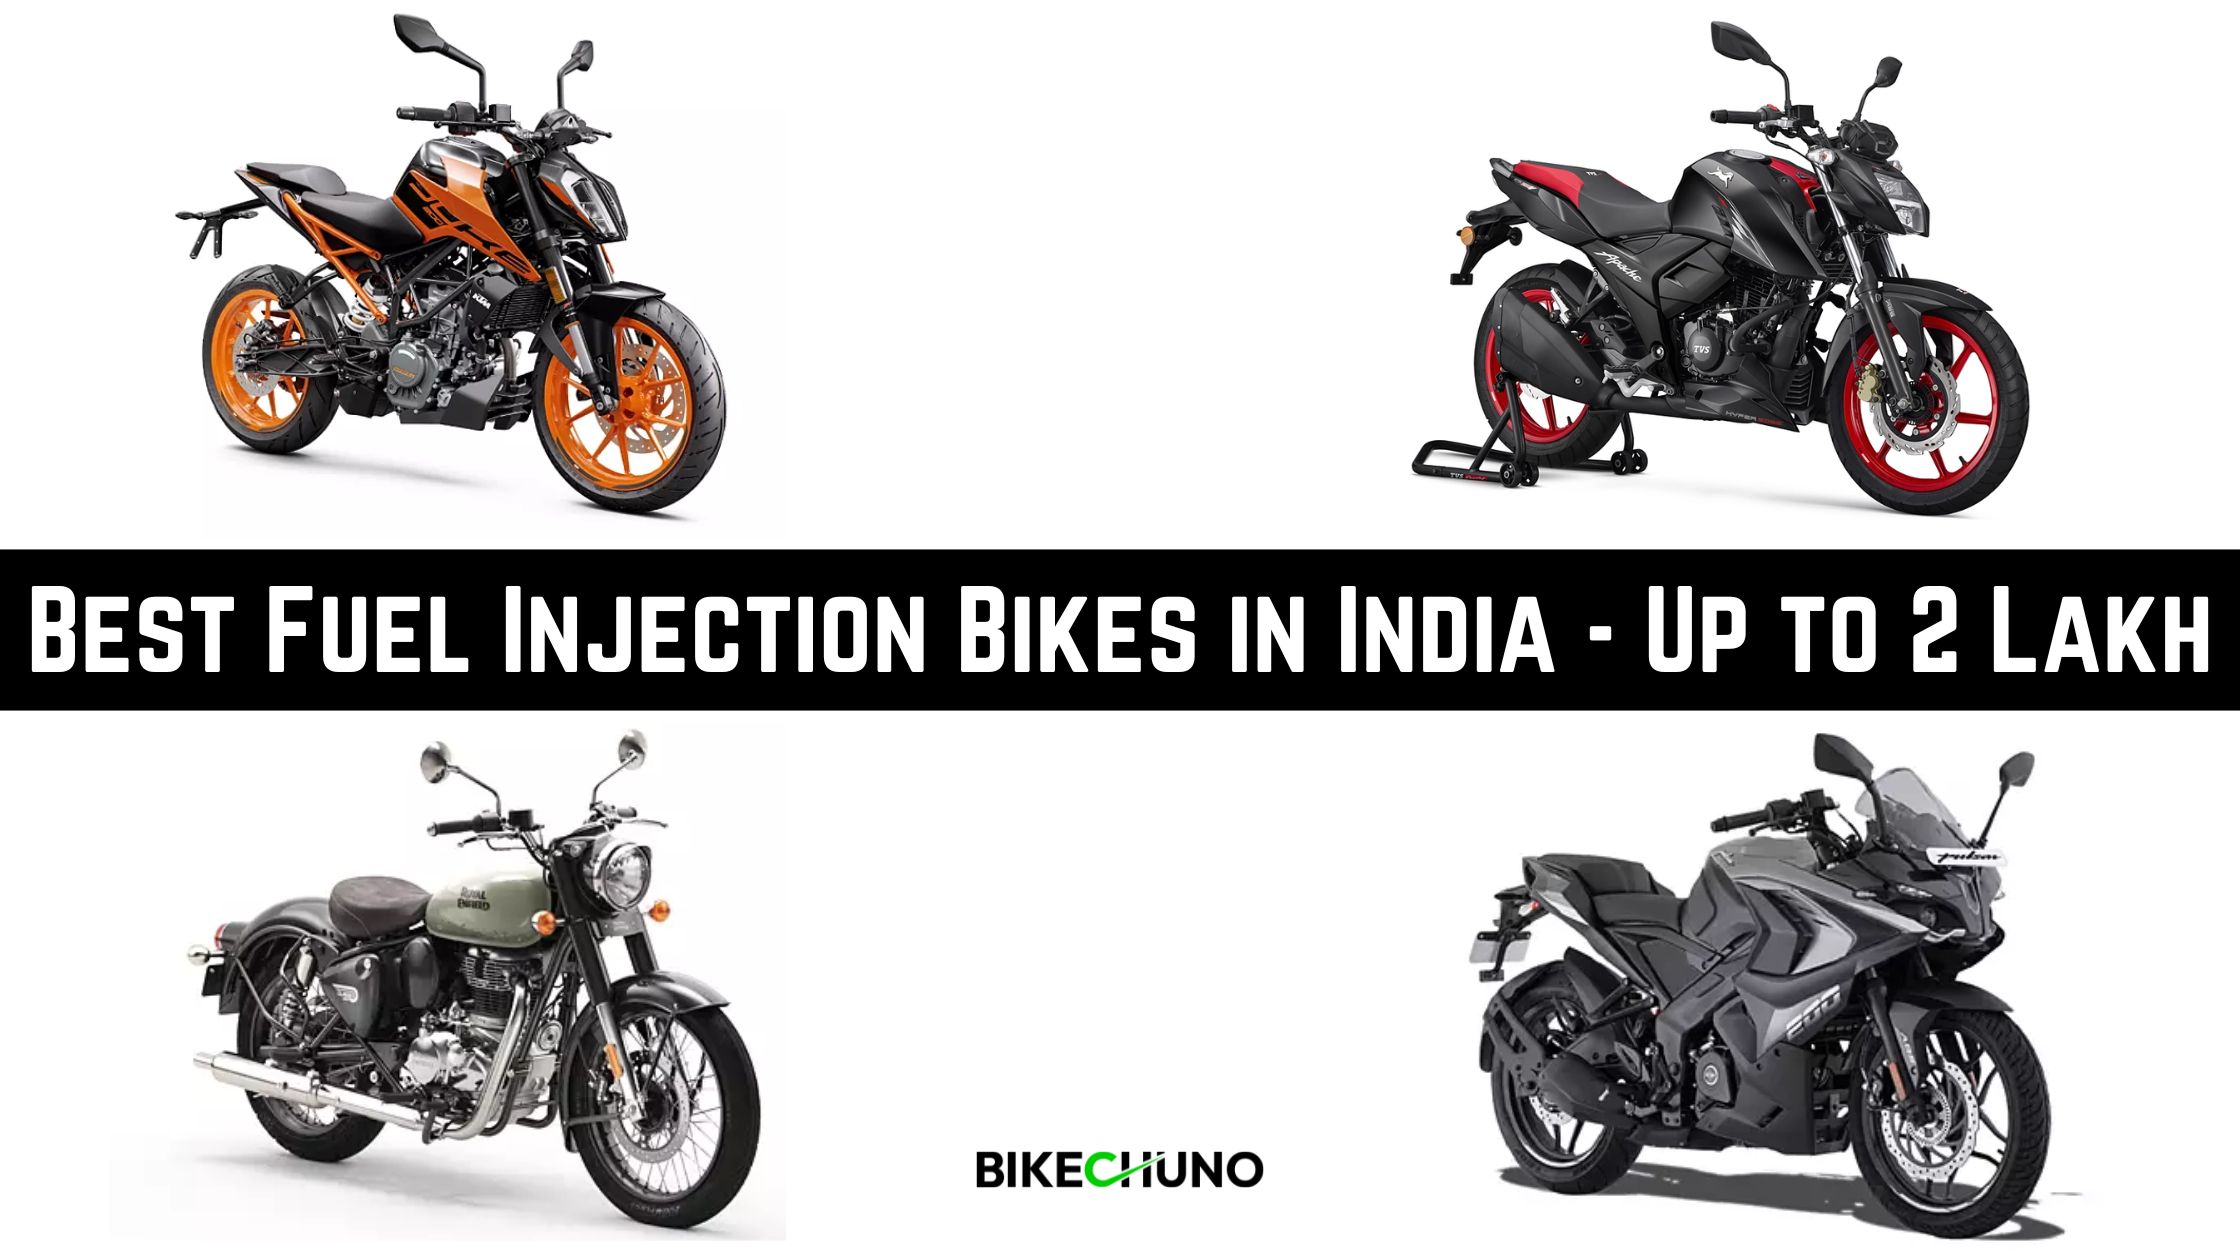 Best Fuel Injection Bikes in India - Up to 2 Lakh